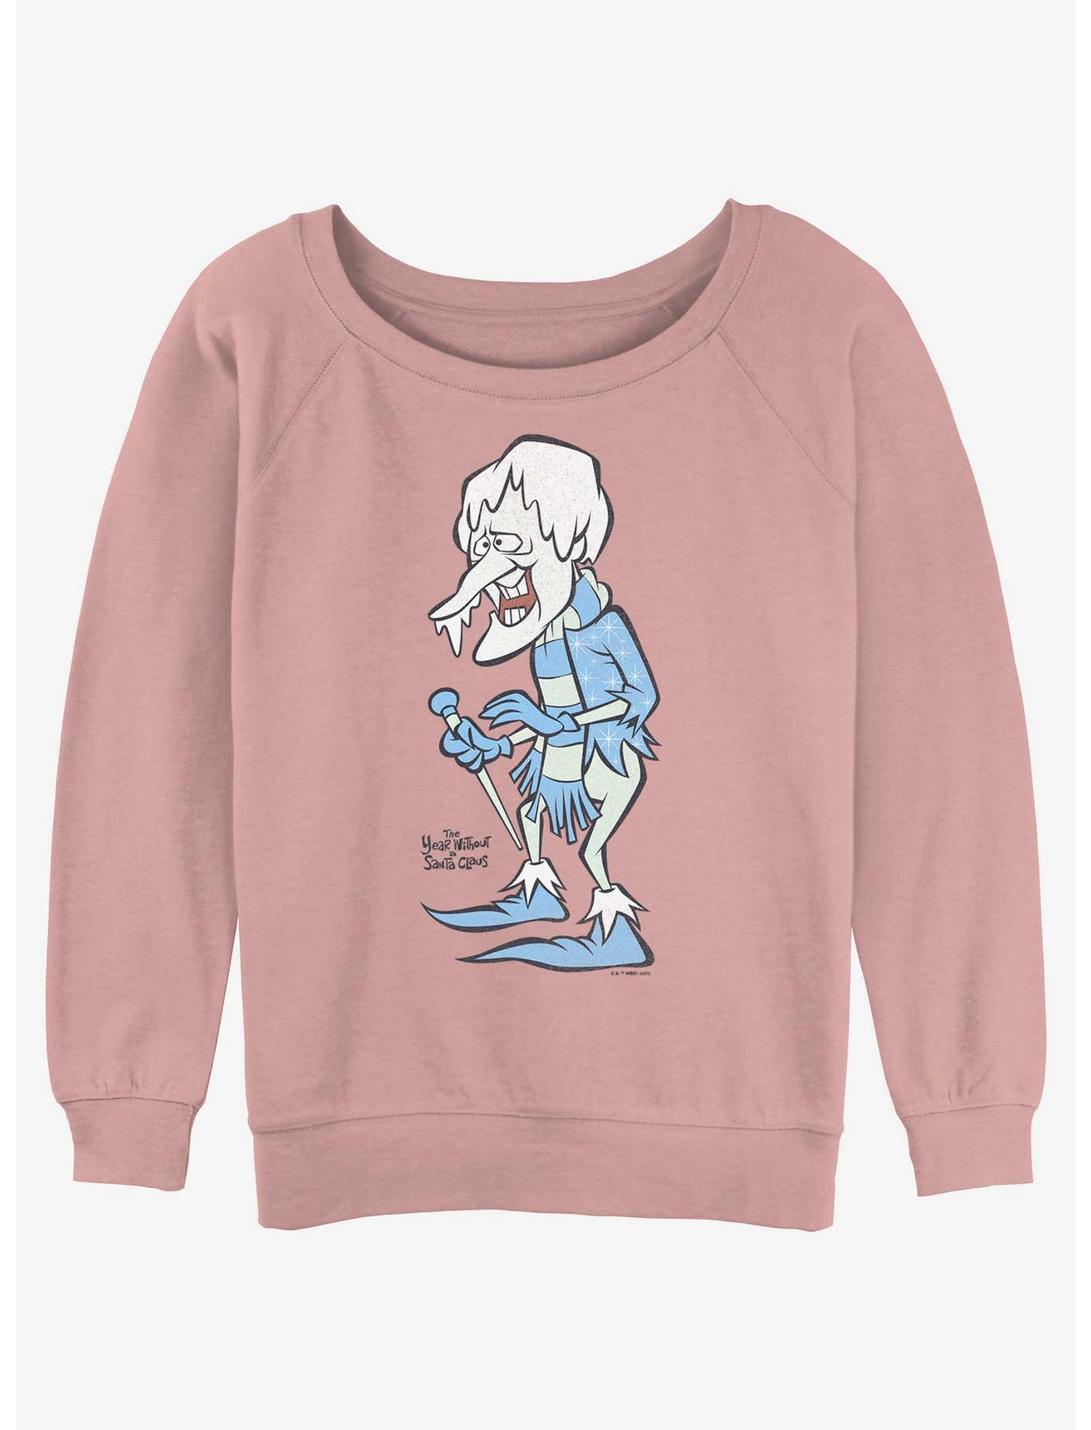 The Year Without a Santa Claus Snow Miser Womens Slouchy Sweatshirt, DESERTPNK, hi-res